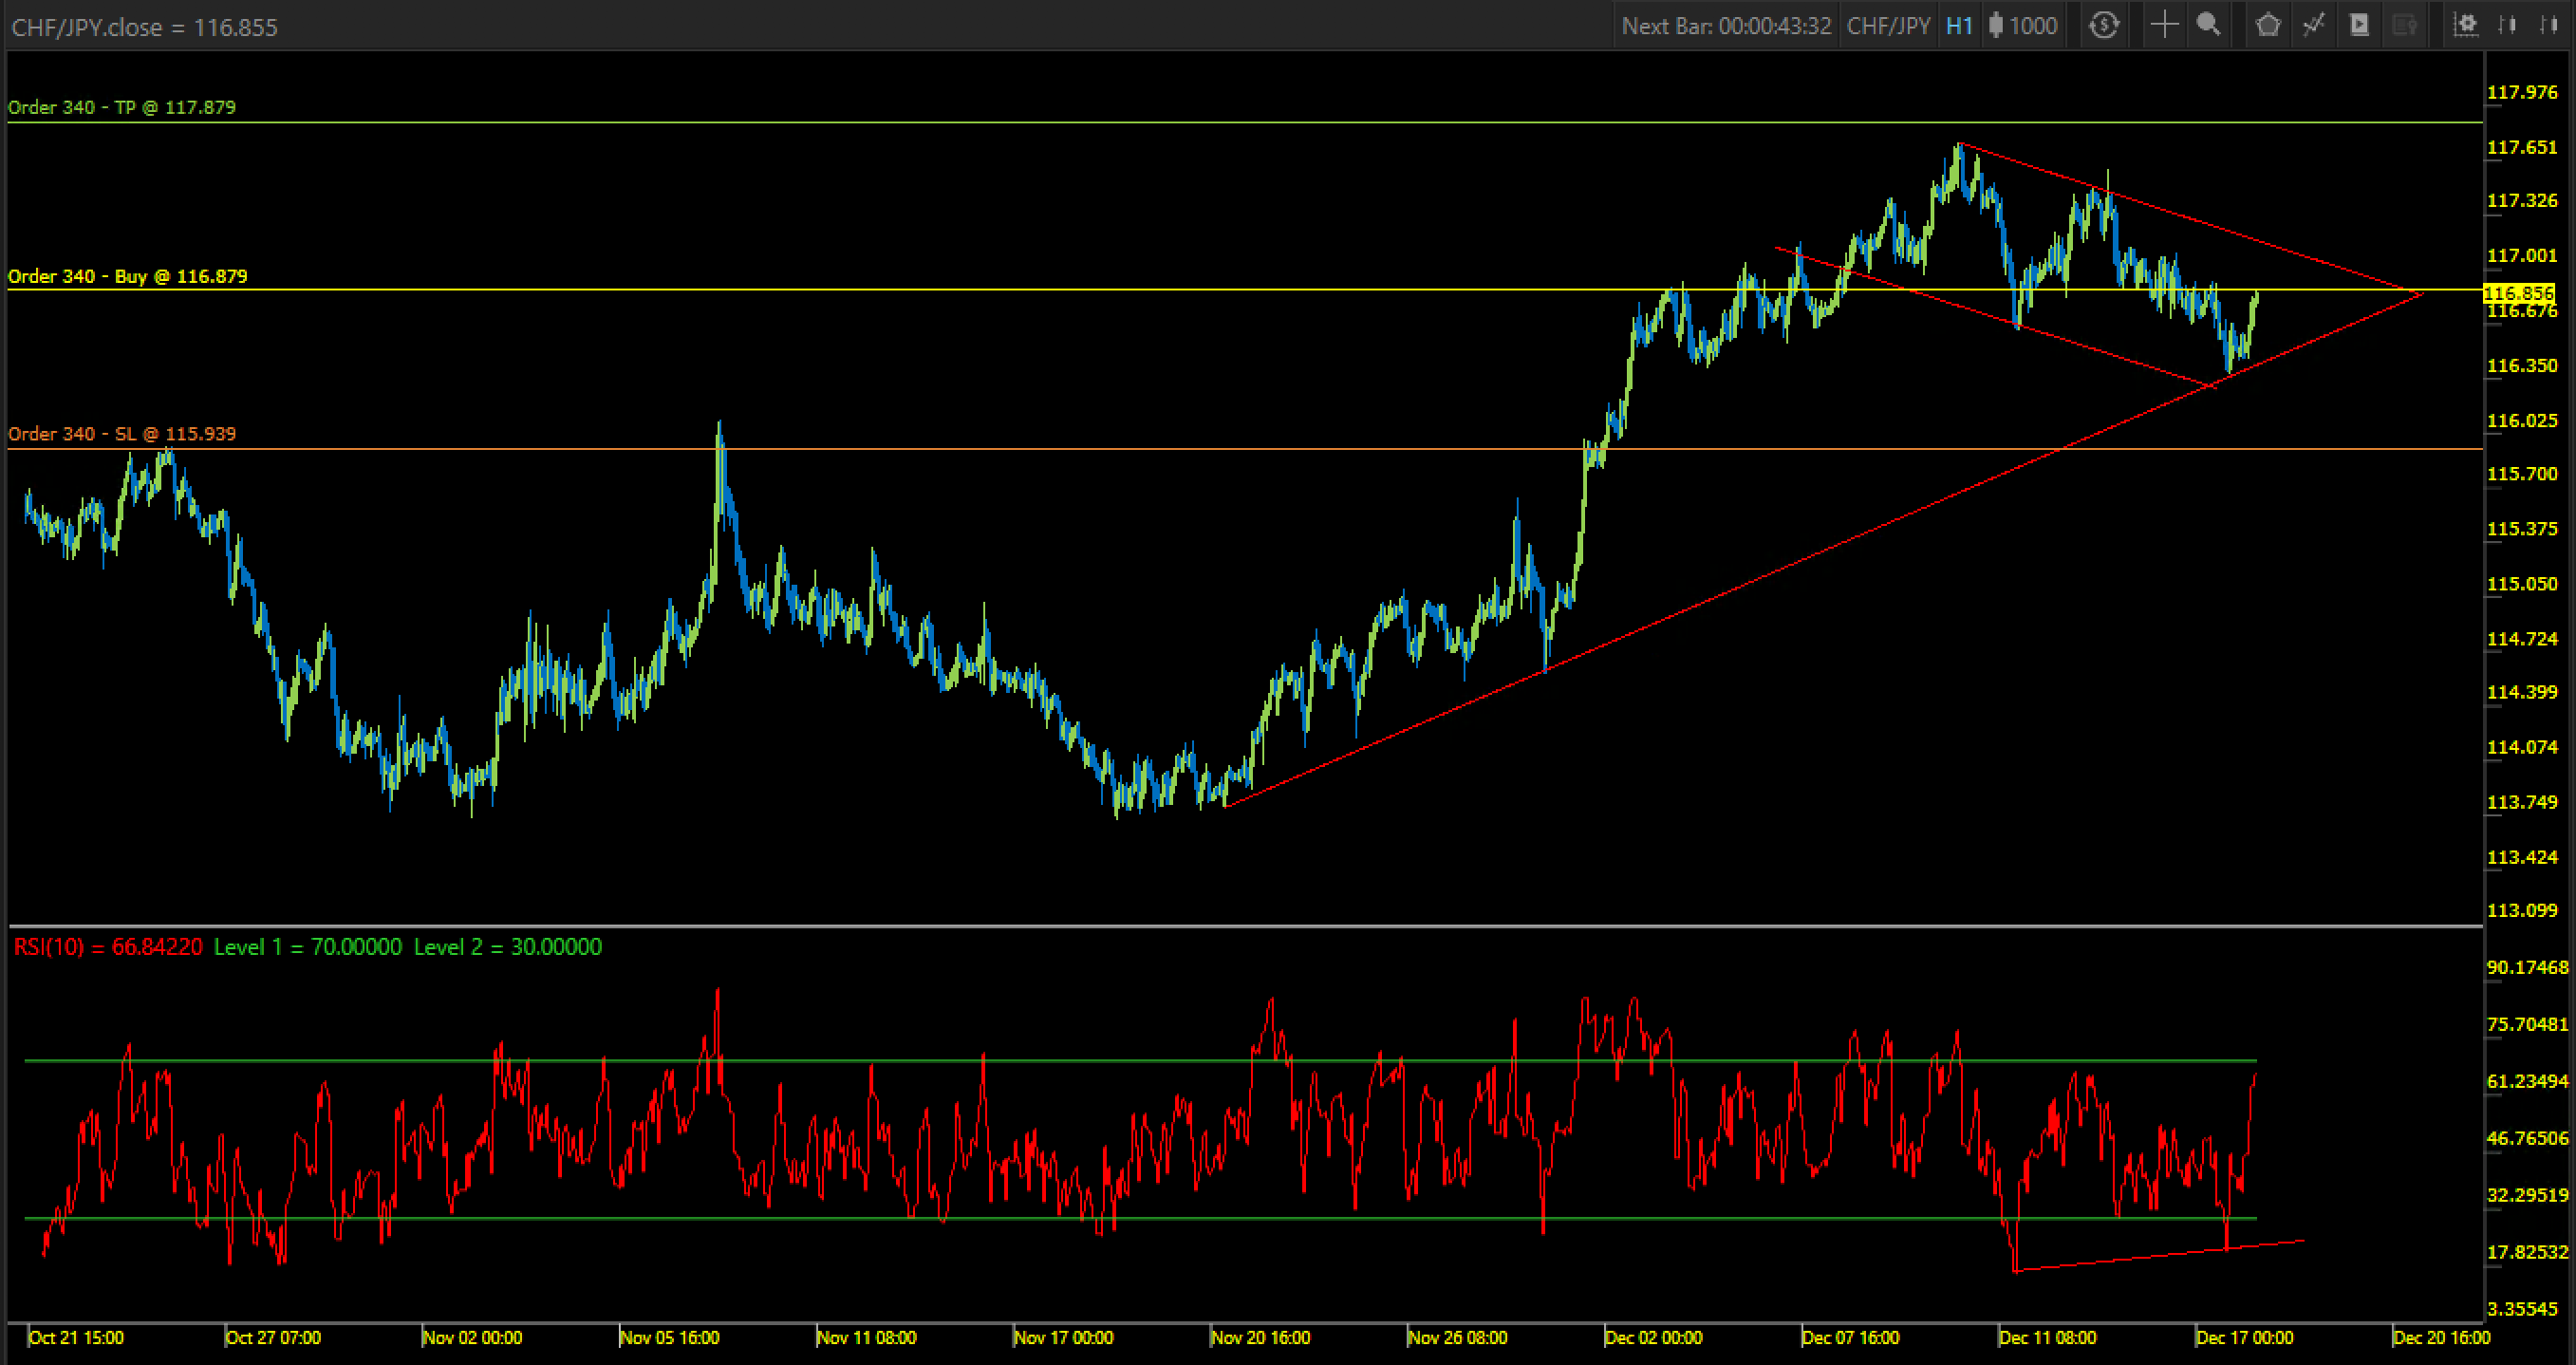 SELL GBPNZD - Short